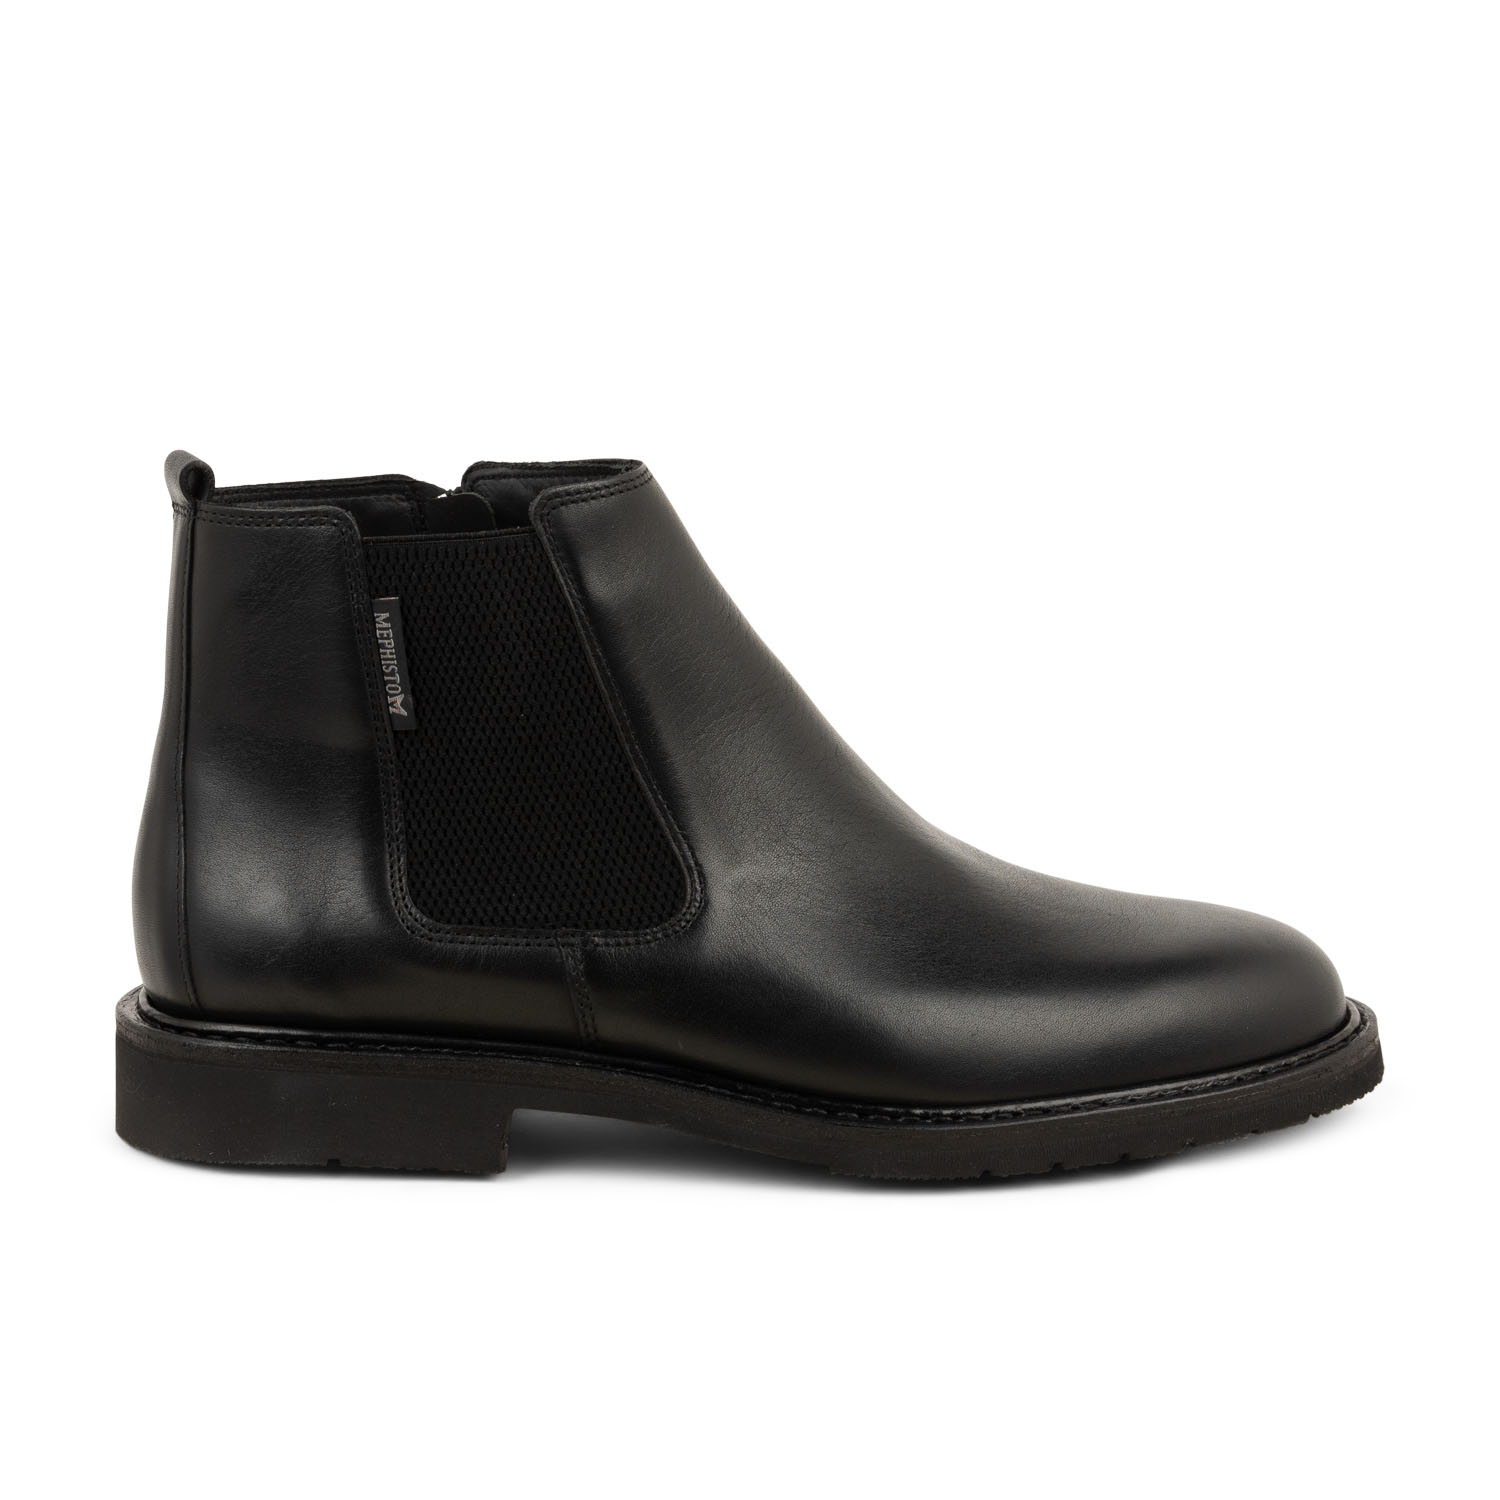 01 - MURRAY - MEPHISTO - Boots et bottines - Cuir